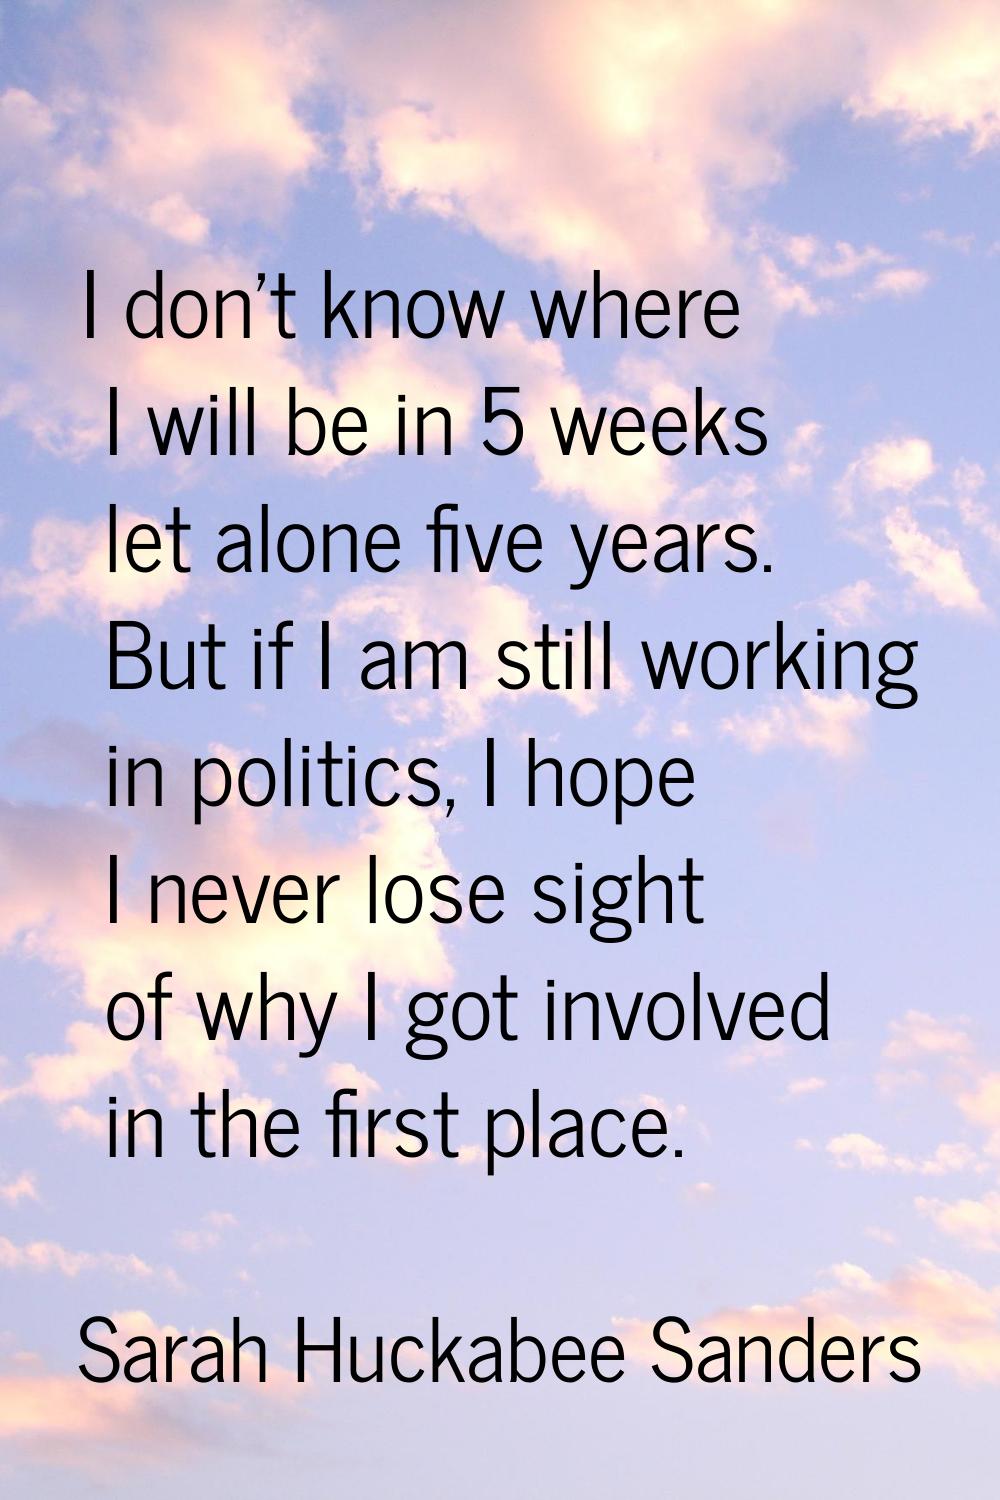 I don't know where I will be in 5 weeks let alone five years. But if I am still working in politics